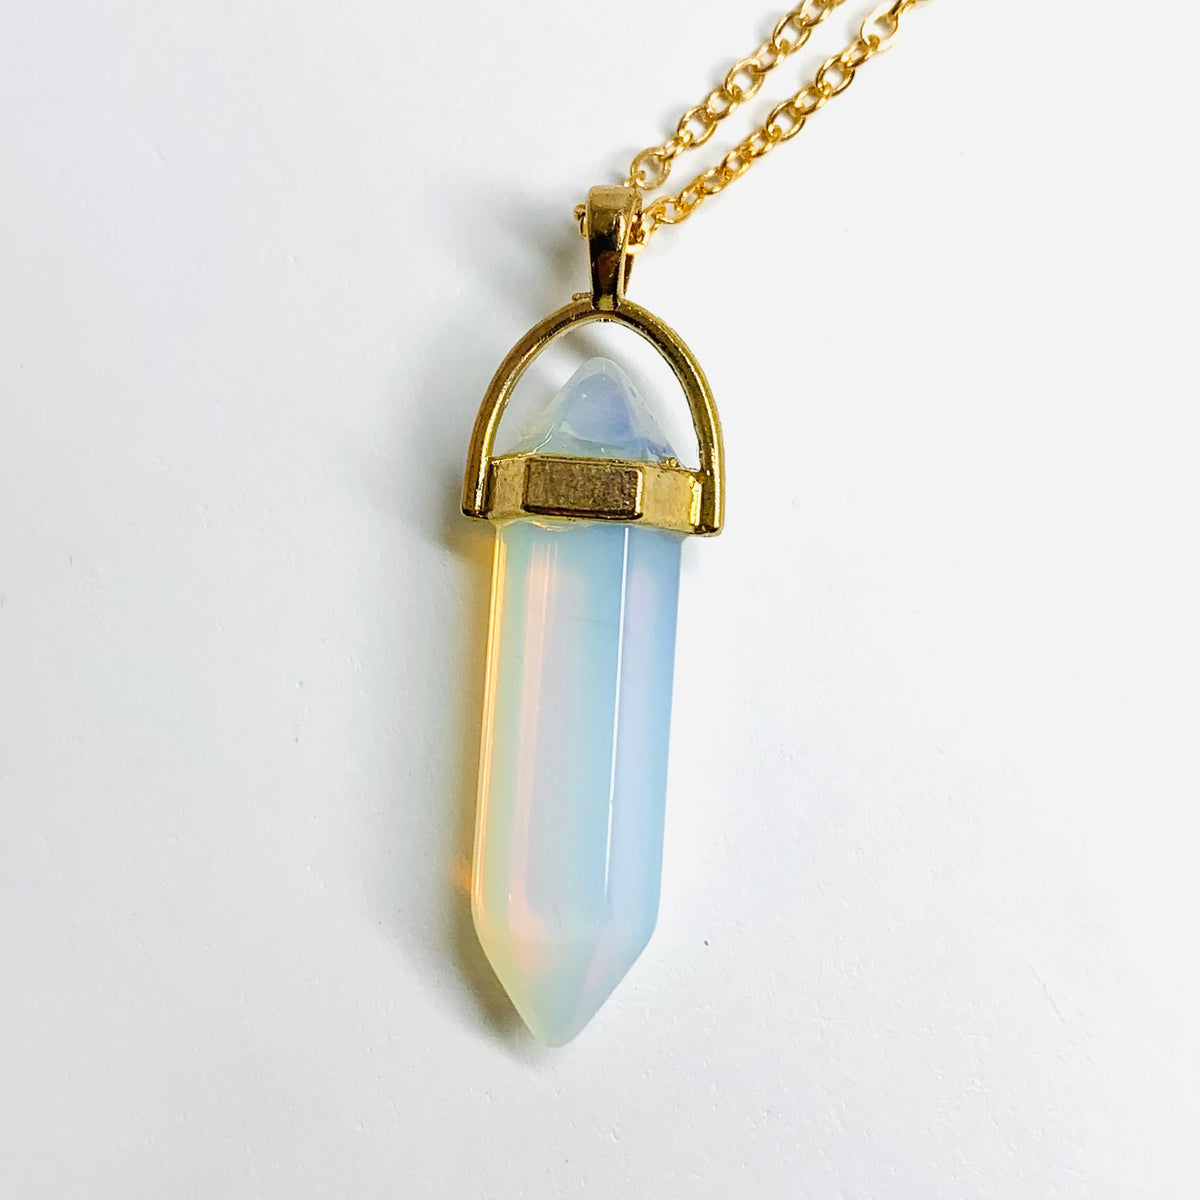 Crystal Pendant Necklace Jewelry - Opalescent 